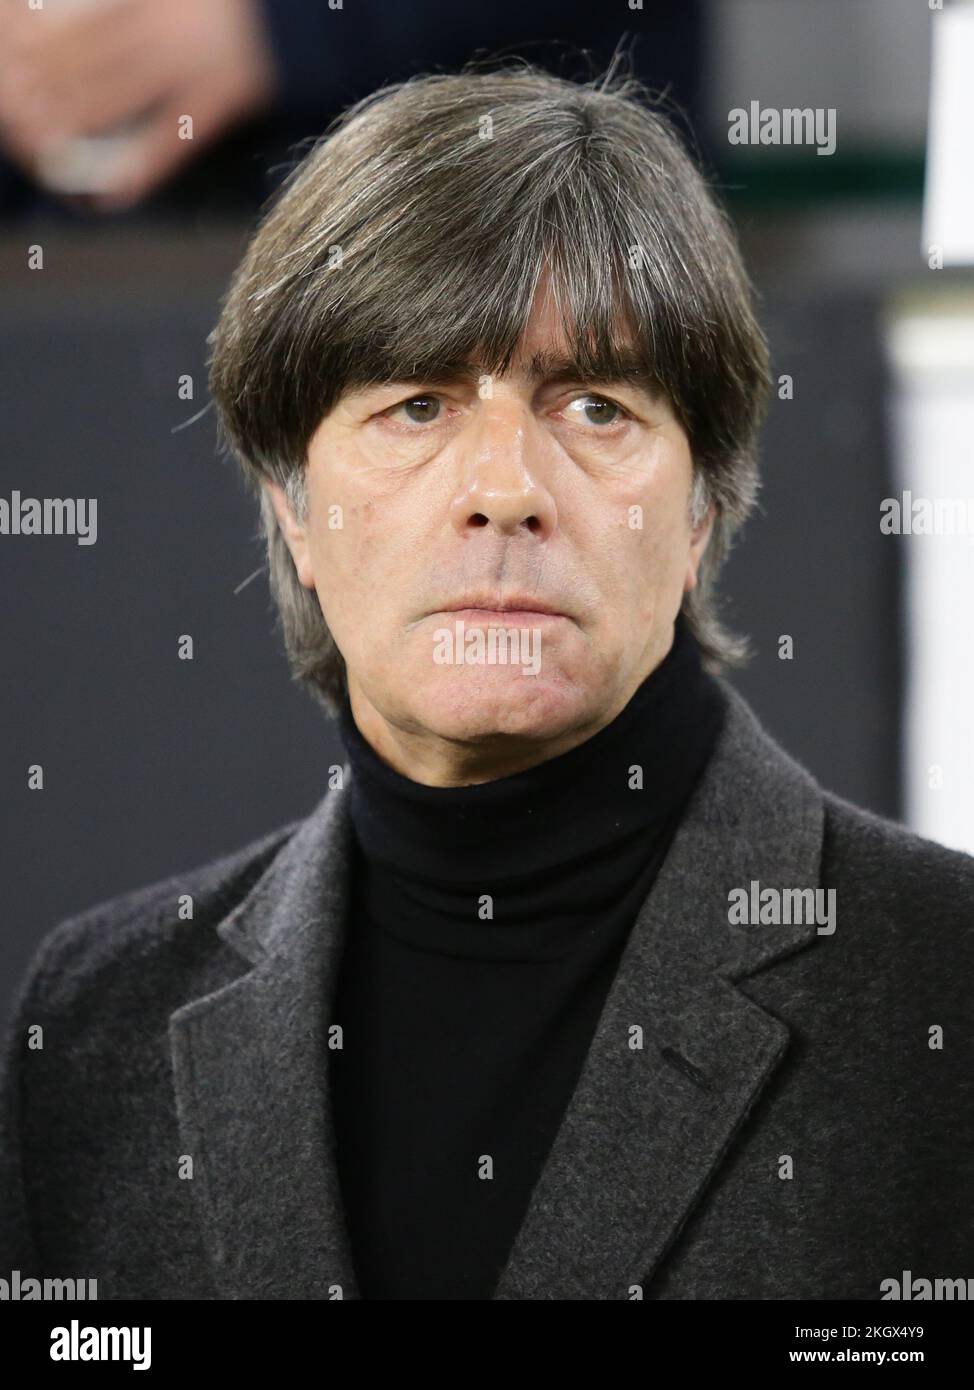 Wolfsburg, Germany, March 20, 2019: 	Germany national team head coach Joachim Low during the international friendly soccer game Germany Stock Photo